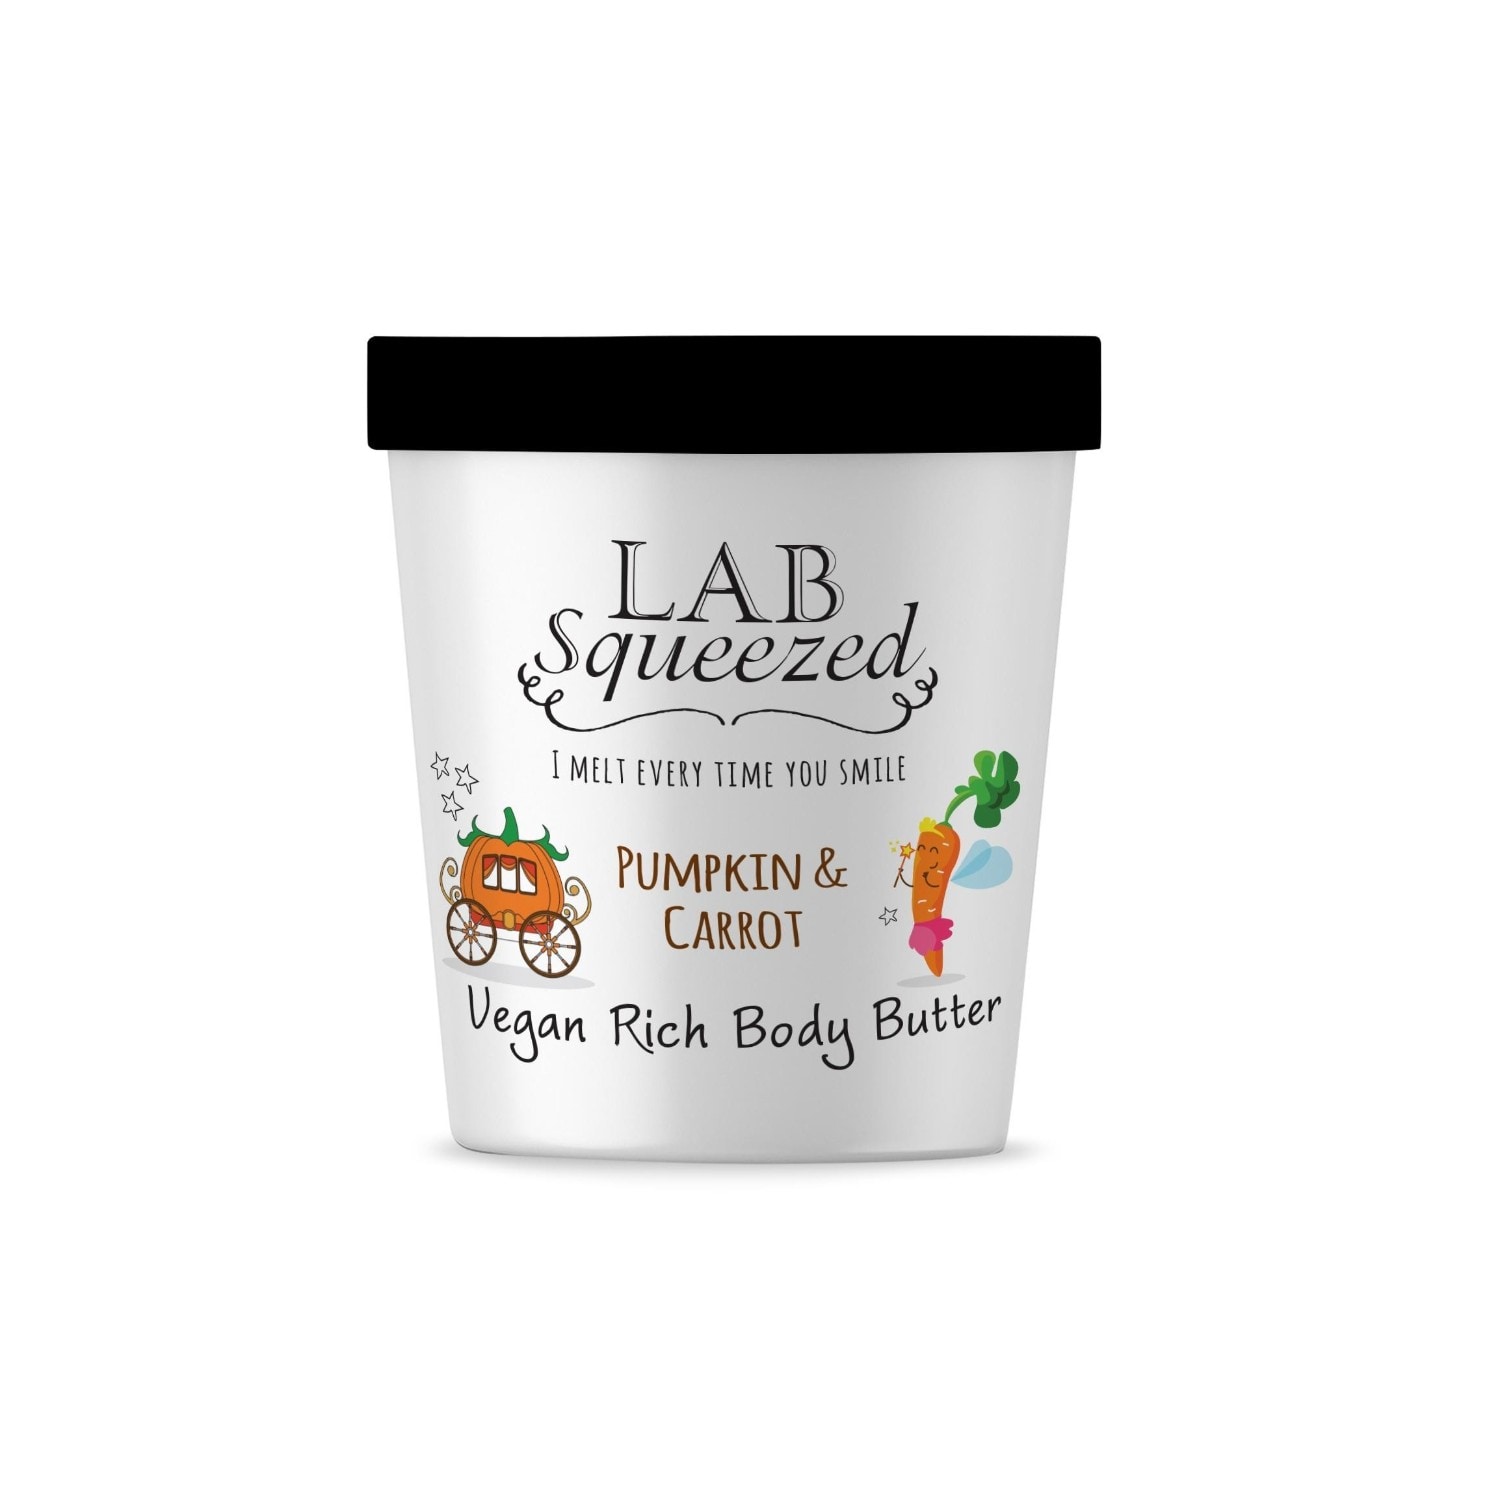 LAB SQUEEZED Vegan Rich Body Butter